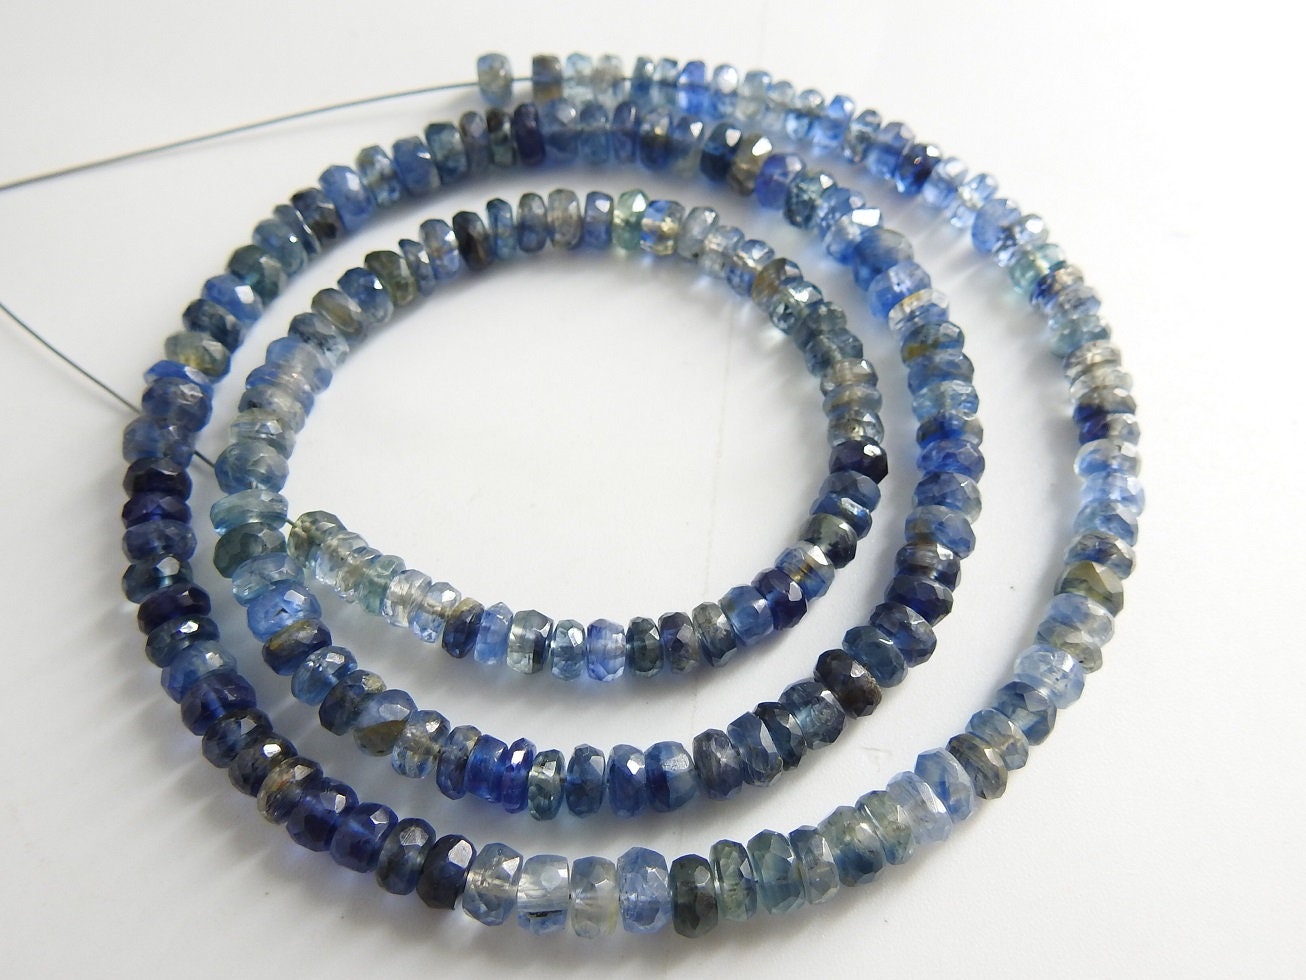 Blue Kyanite Faceted Roundel Bead,Multi Shaded,Handmade,Loose Stone,Necklace,For Jewelry Making 100%Natural 16Inch Strand PME(B13) | Save 33% - Rajasthan Living 18